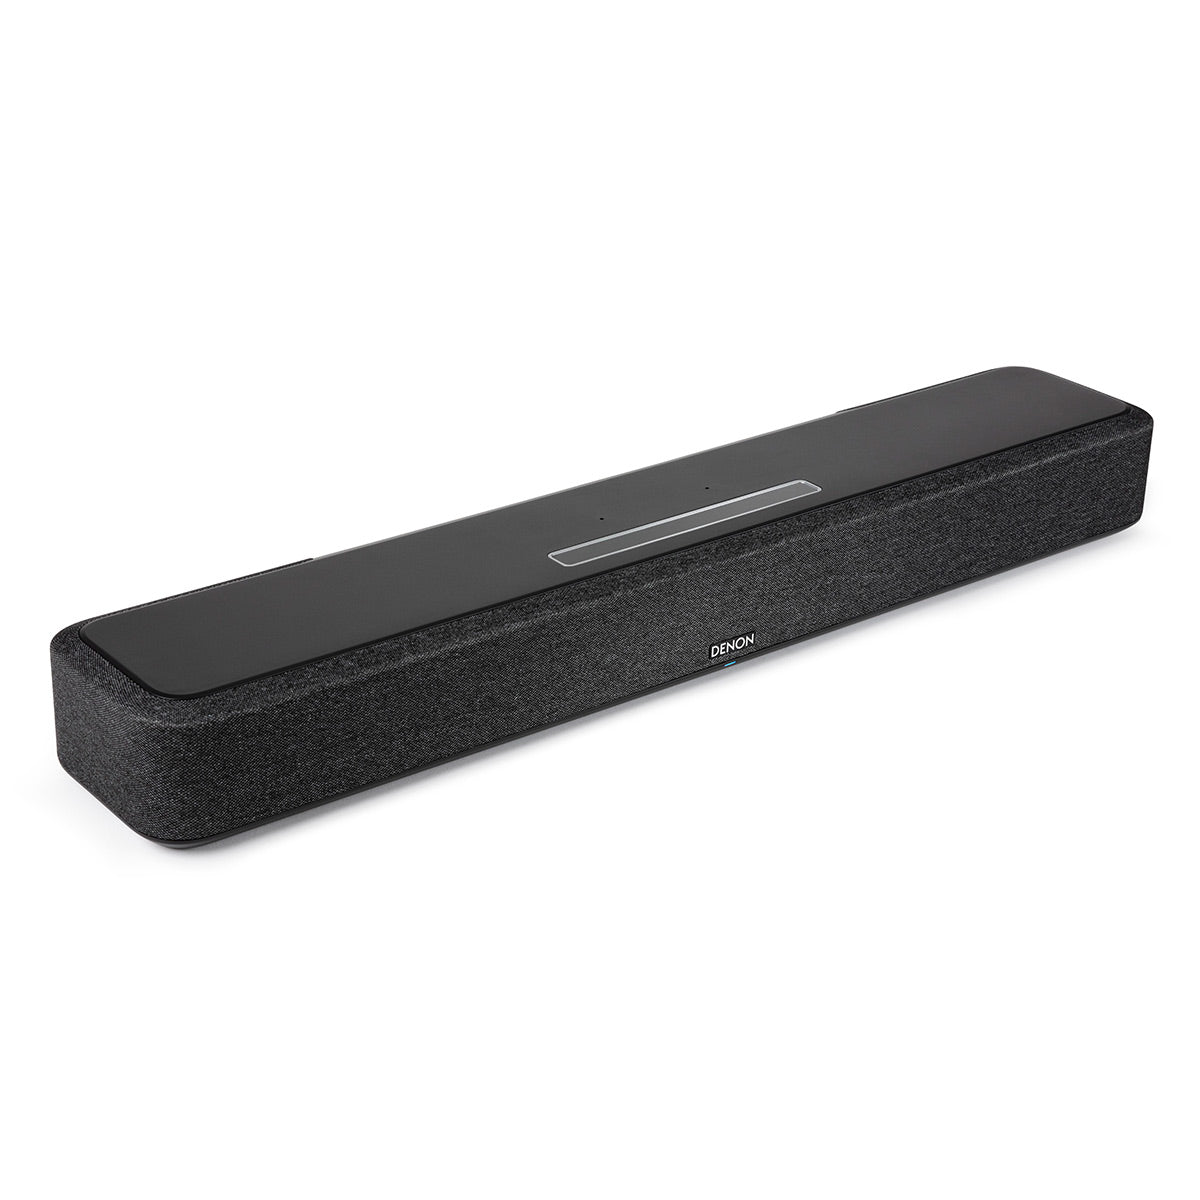 Denon Home Sound Bar 550 with Dolby Atmos and HEOS Built-in (Factory Certified Refurbished)